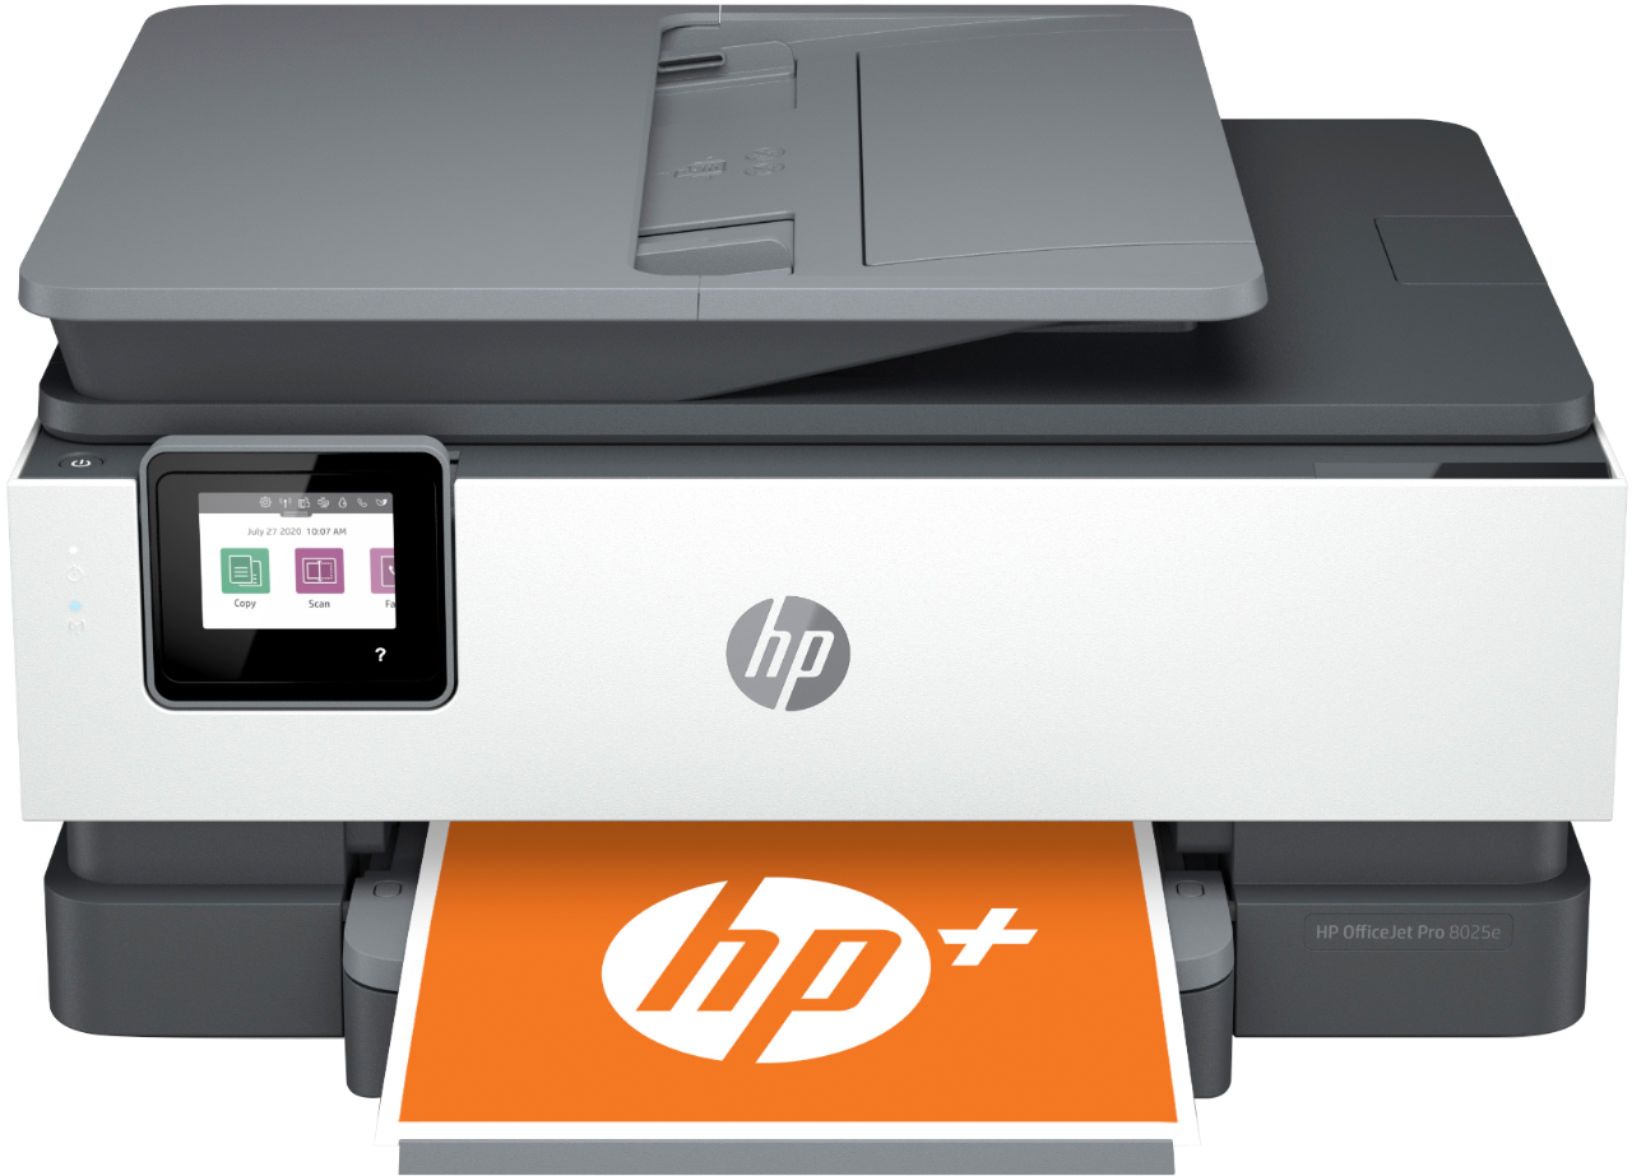 HP OfficeJet Pro 8025e Wireless All-In-One Printer with 6 months of Instant Ink Included with OJP 8025e - Best Buy